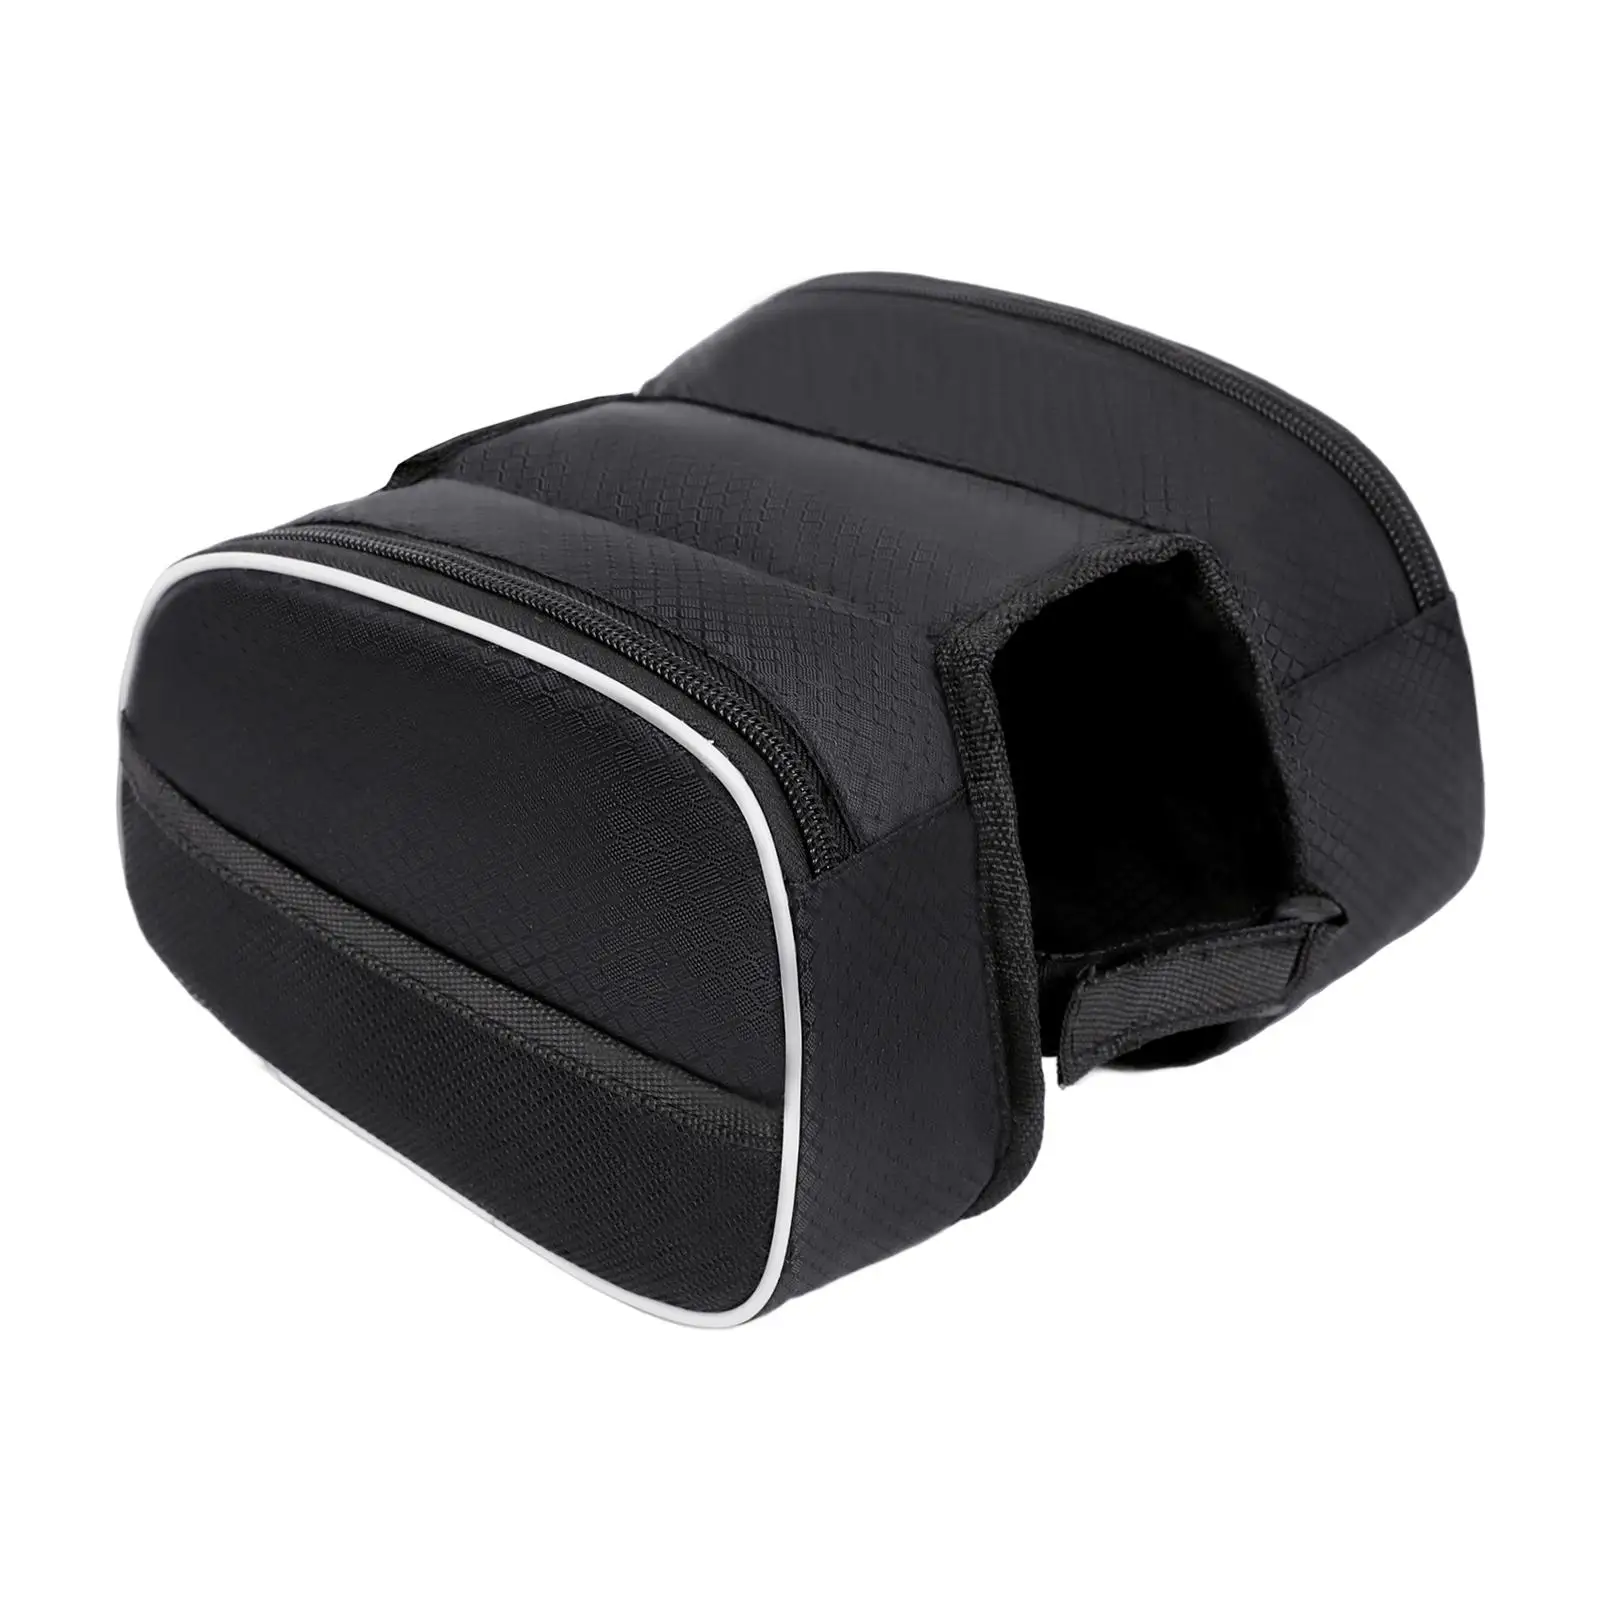 Bicycle Front Frame Bag Pouch Bike Phone Holder Repair Tool Placement Bag Storage Multifunctional Pack Bike Panniers